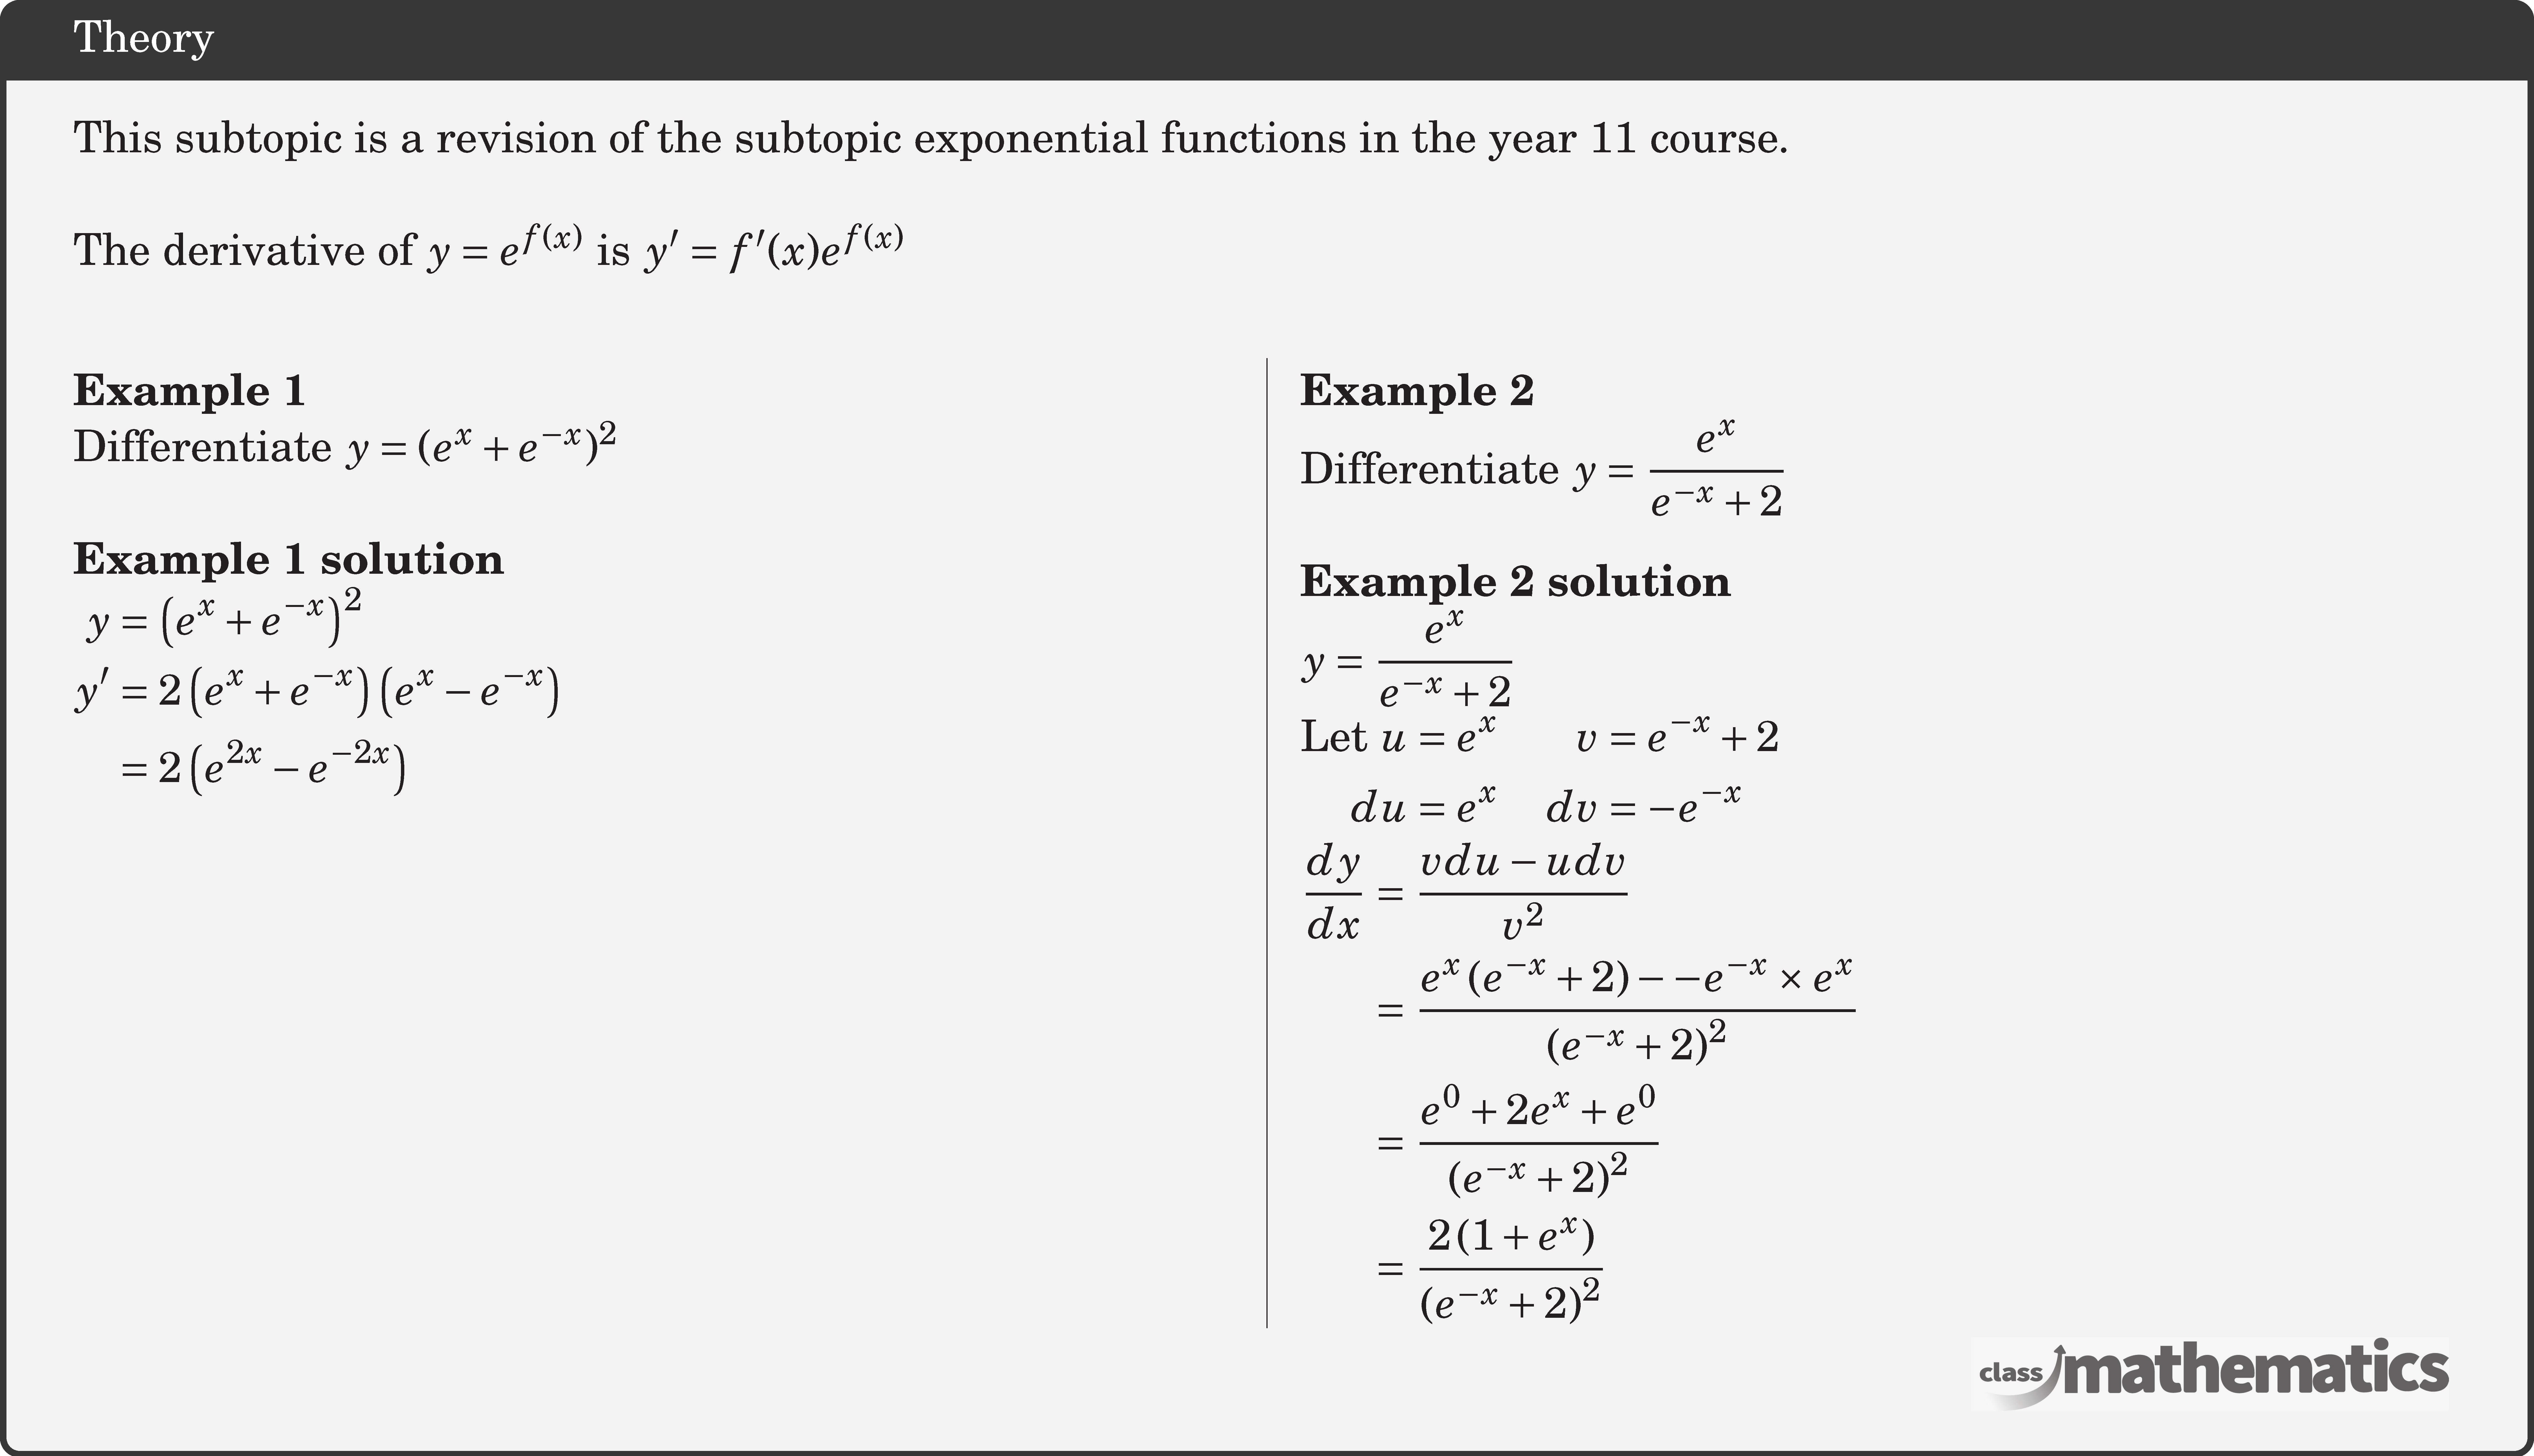 This subtopic is a revision of the subtopic exponential functions in the year 11 course.\\  The derivative of \(y=e^{f(x)}\) is \(y^{\prime}=f^{\prime}(x) e^{f(x)}\)\\  \begin{multicols}{2}  \textbf{Example 1}\\ %10622 Differentiate \(y = {({e^x} + {e^{ - x}})^2}\)\\  \textbf{Example 1 solution}\\ $\begin{aligned} y&=\left(e^{x}+e^{-x}\right)^{2} \\ y^{\prime} &=2\left(e^{x}+e^{-x}\right)\left(e^{x}-e^{-x}\right) \\ &=2\left(e^{2 x}-e^{-2 x}\right) \end{aligned}$\\  \columnbreak \textbf{Example 2}\\ %124266 Differentiate \(y = \dfrac{{{e^x}}}{{{e^{ - x}} + 2}}\)\\  \textbf{Example 2 solution}\\ \(\begin{aligned} y &=\frac{e^{x}}{e^{-x}+2}  \end{aligned}\)\\ \(\begin{aligned}  \text {Let } u &=e^{x} & v&=e^{-x}+2 \\  du &=e^{x} & dv&=-e^{-x}  \end{aligned}\)\\ \(\begin{aligned}  \frac{d y}{d x} &=\frac{v d u-u d v}{v^{2}} \\ &=\frac{e^{x}\left(e^{-x}+2\right)--e^{-x} \times e^{x}}{\left(e^{-x}+2\right)^{2}} \\ &=\frac{e^{0}+2 e^{x}+e^{0}}{\left(e^{-x}+2\right)^{2}} \\ &=\frac{2\left(1+e^{x}\right)}{\left(e^{-x}+2\right)^{2}} \end{aligned}\) \end{multicols}